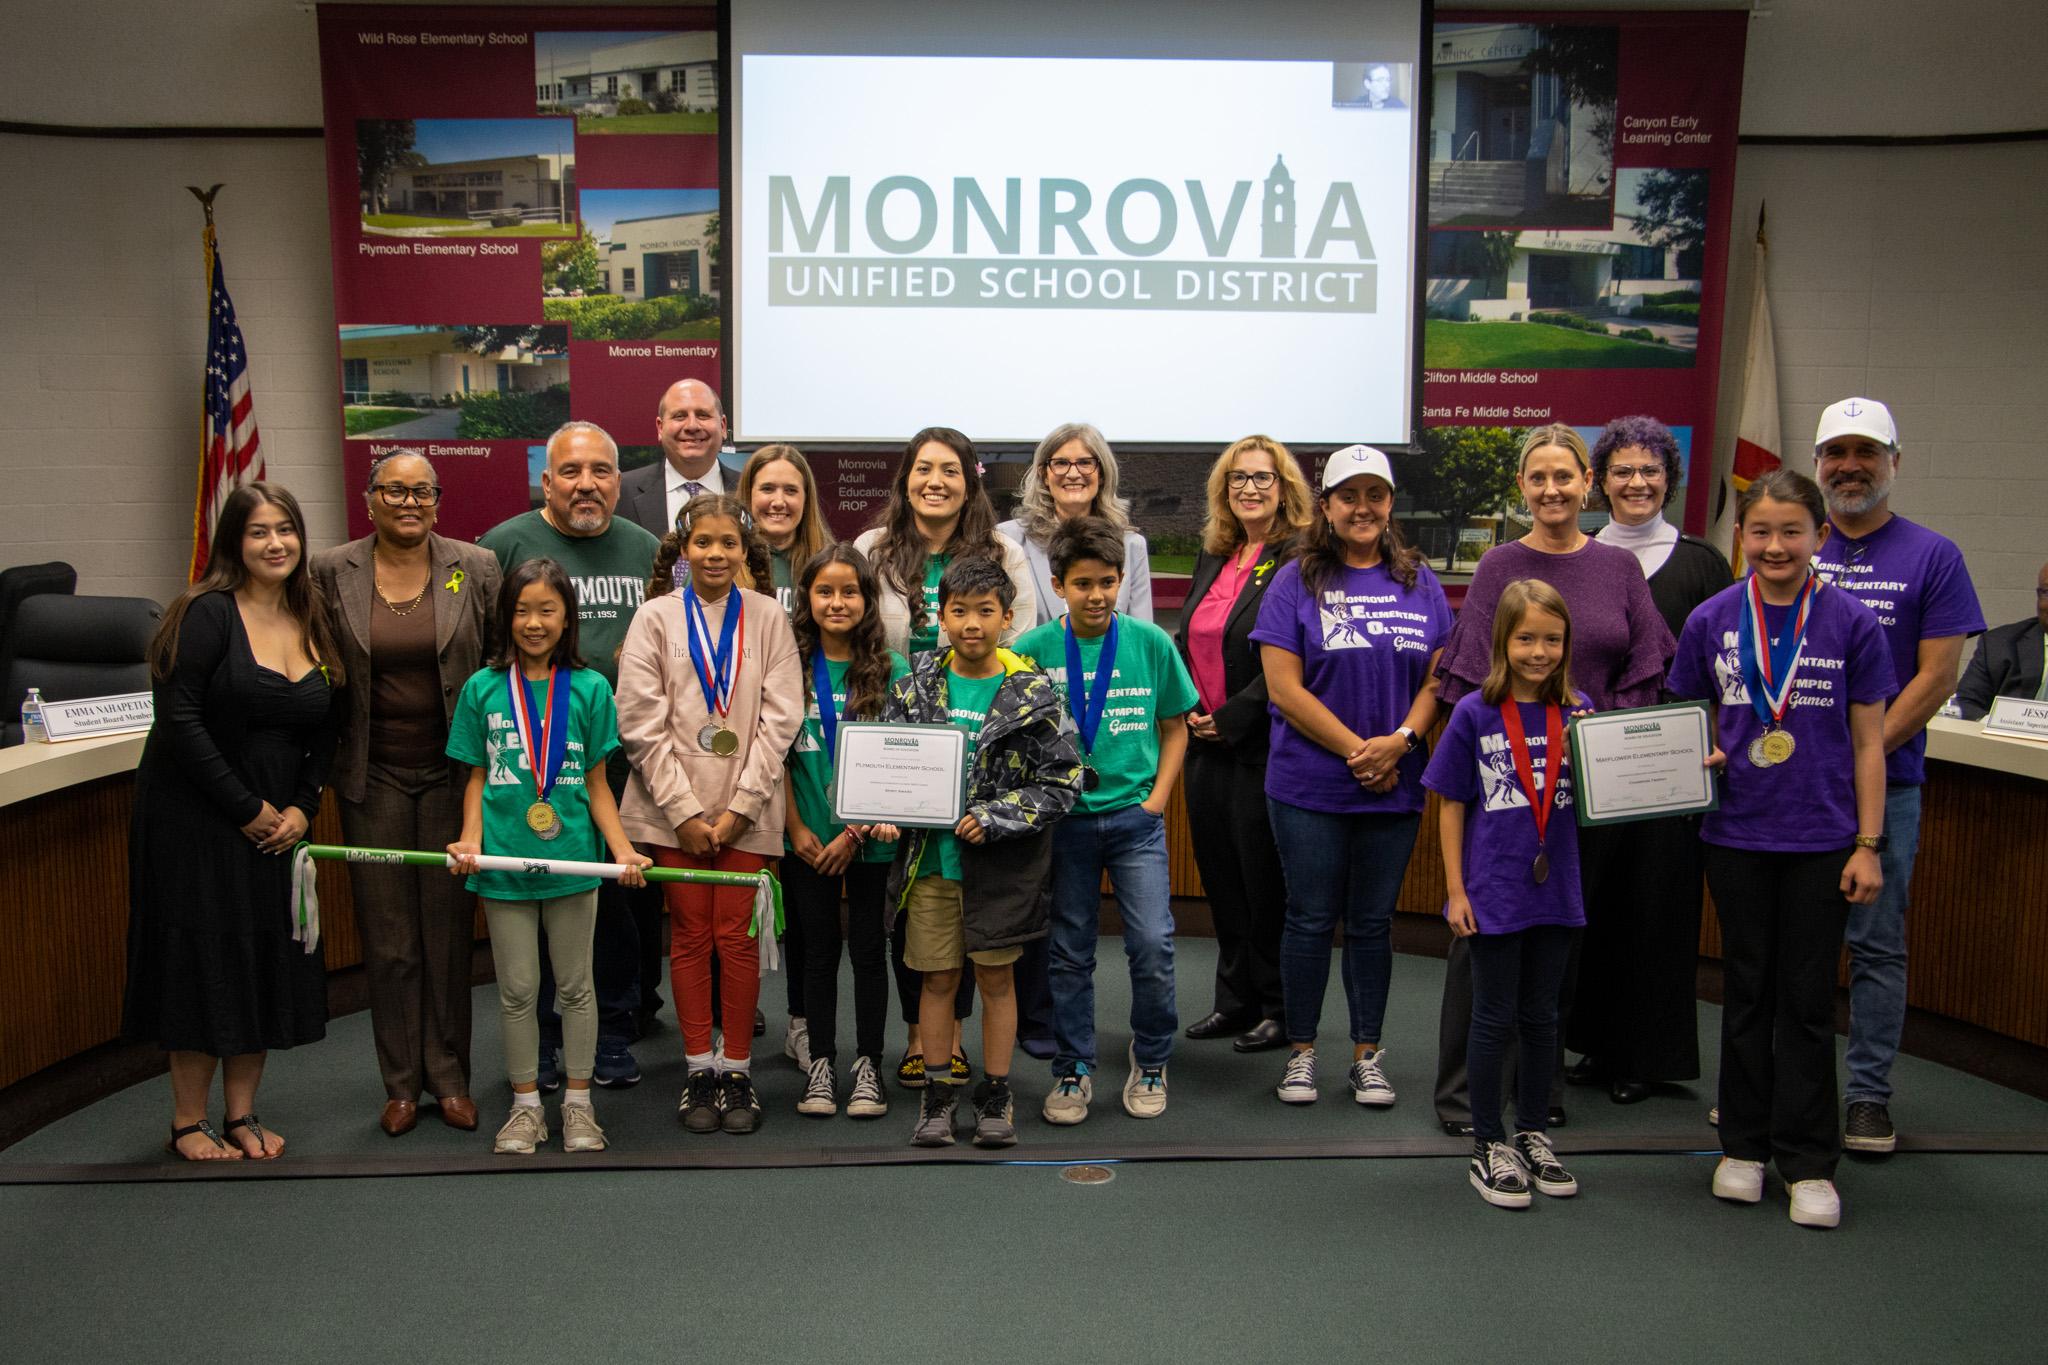 The Board of Education invited the winners of the Monrovia Elementary Olympics after the event was brought back for the first time since 2019.